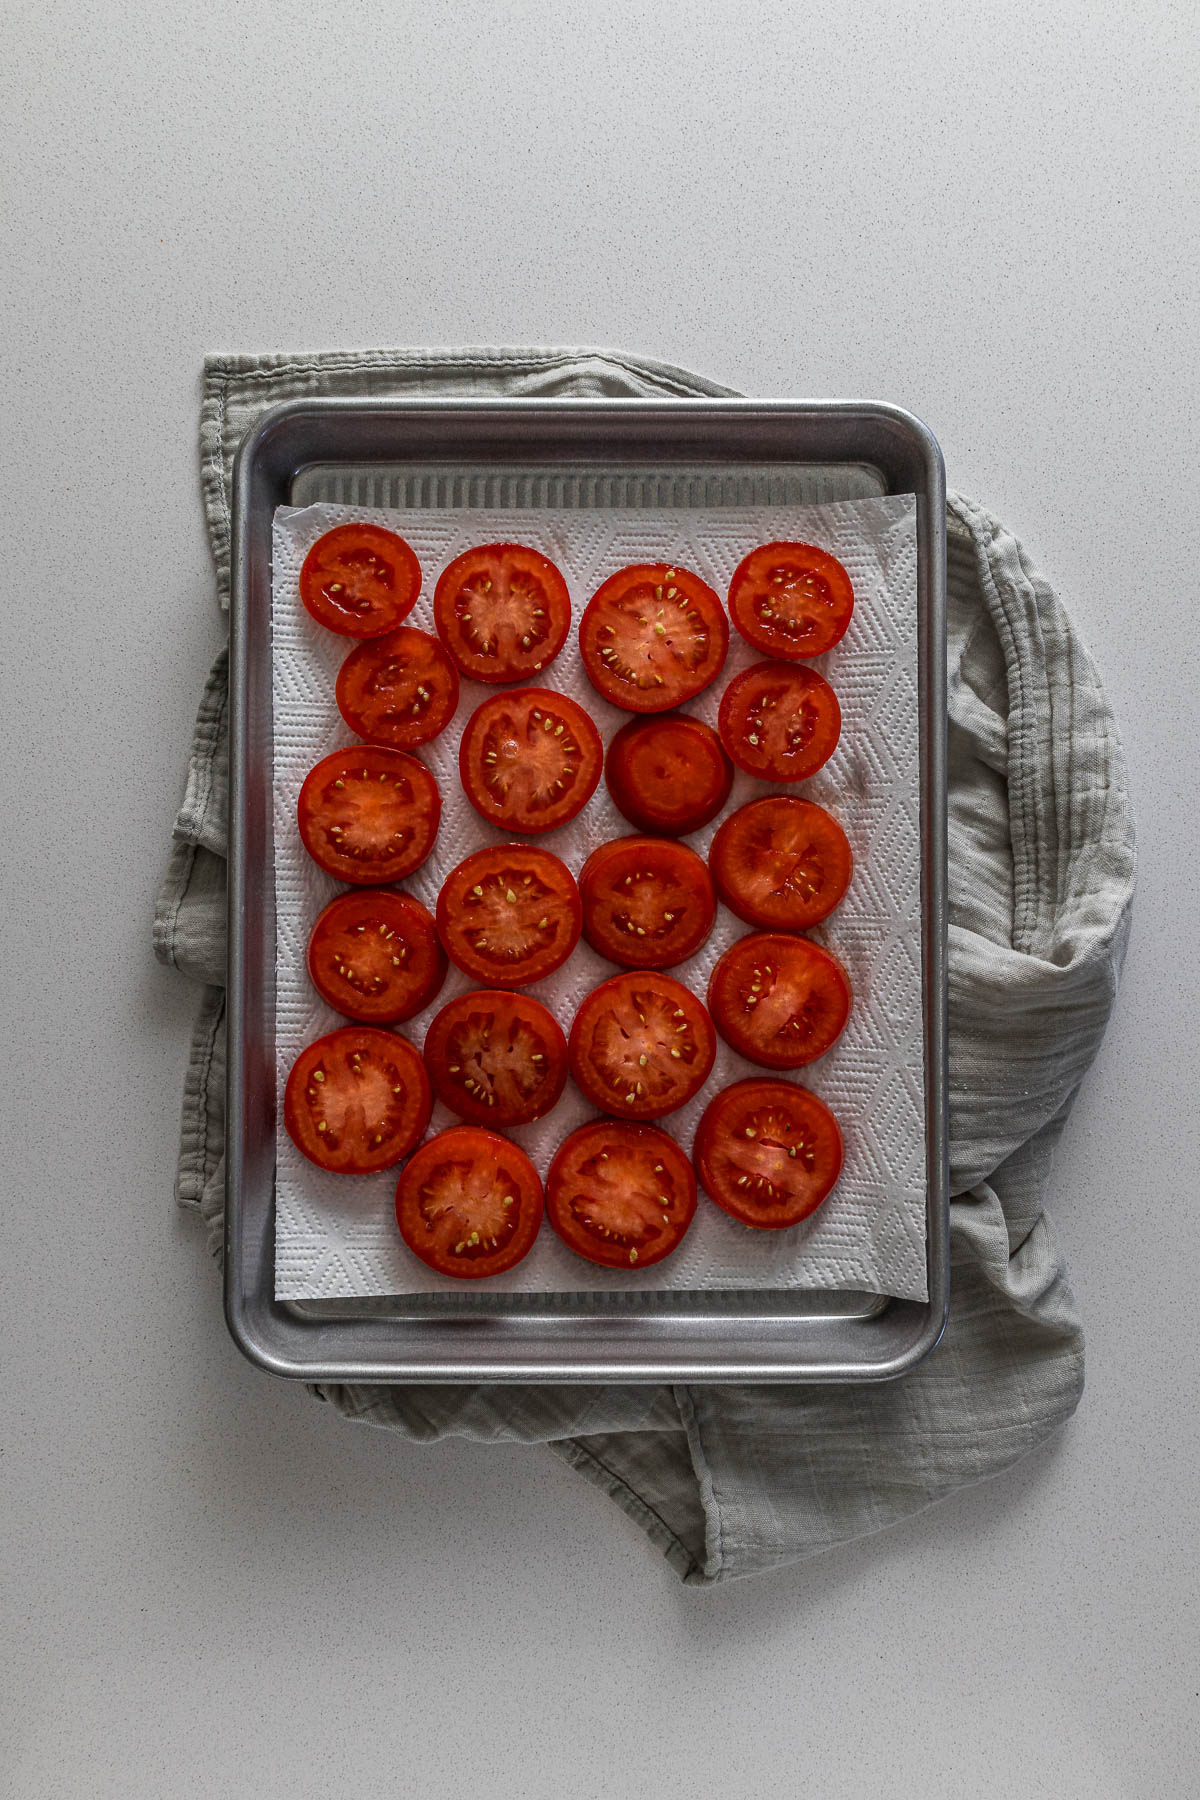 Step 5 - Removing excess moisture from tomatoes by placing them on paper towels.